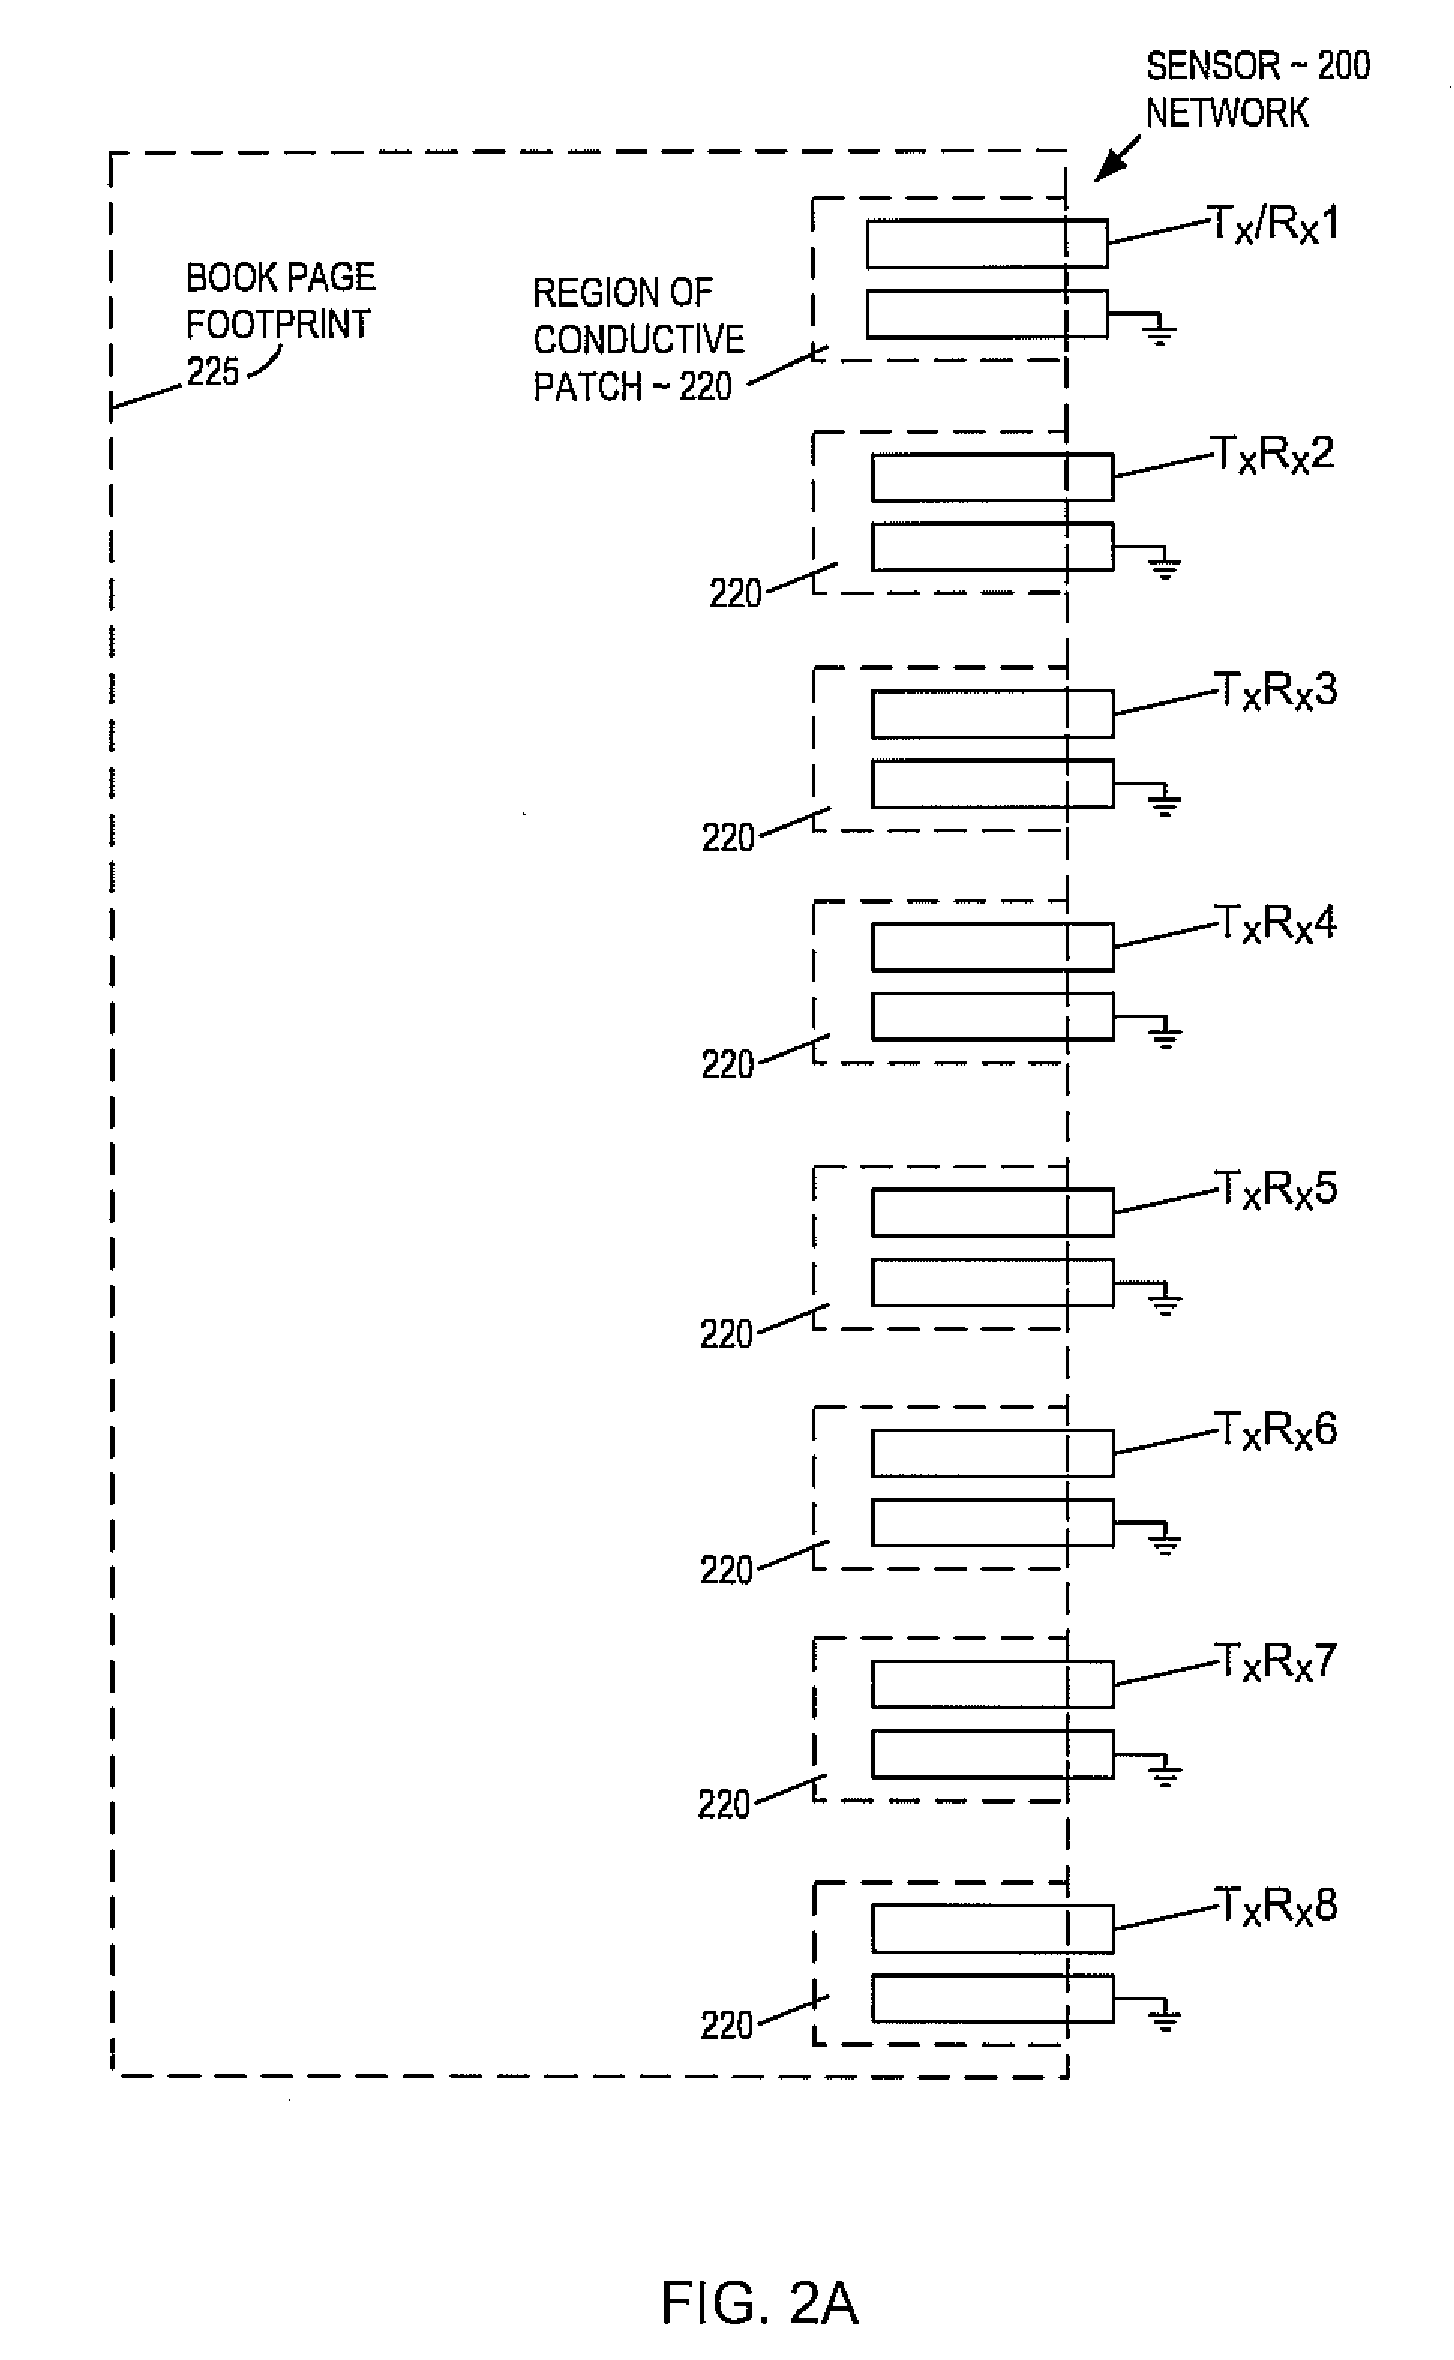 Capacitive sensing of media information in an interactive media device